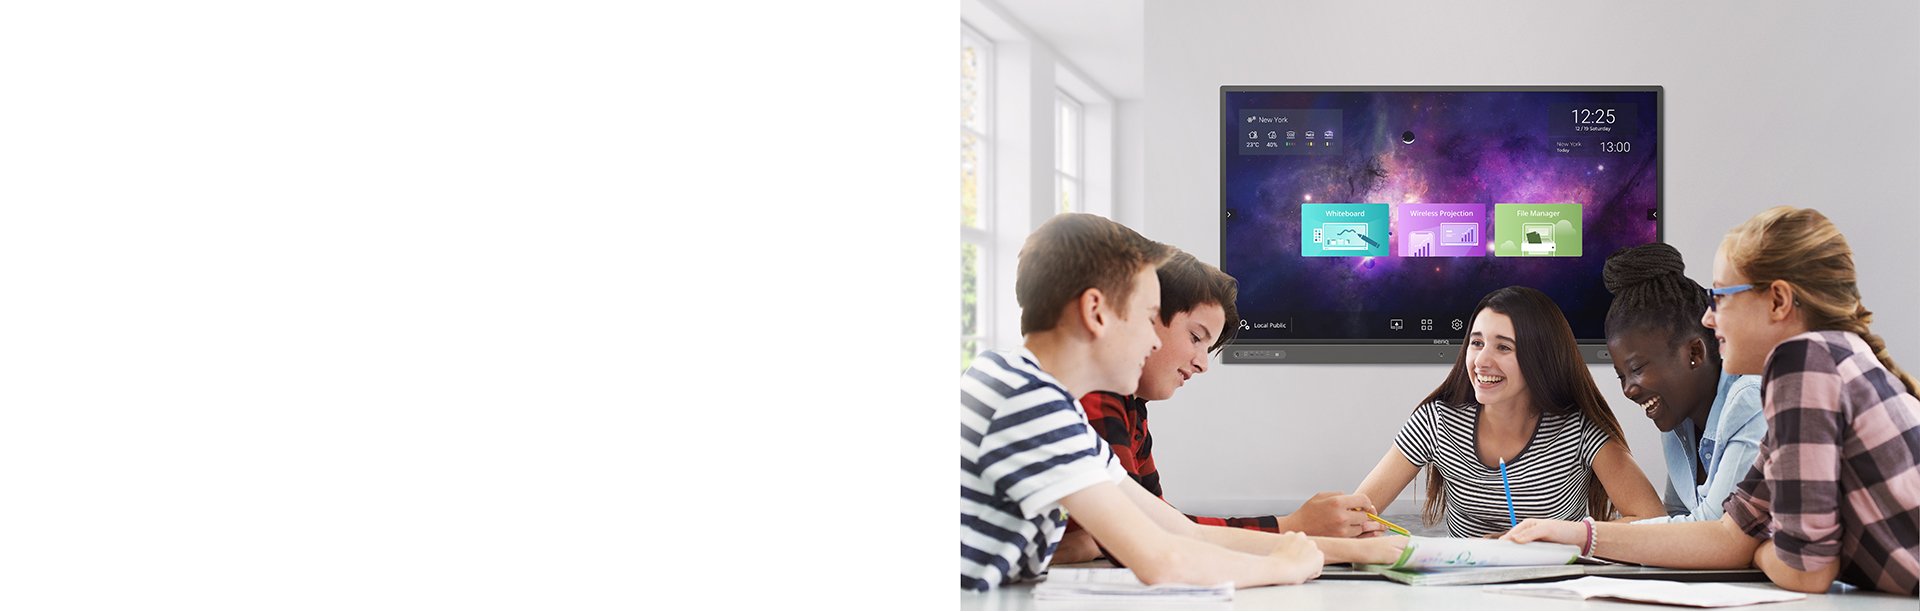 Students collaborate in the classroom with BenQ Interactive display